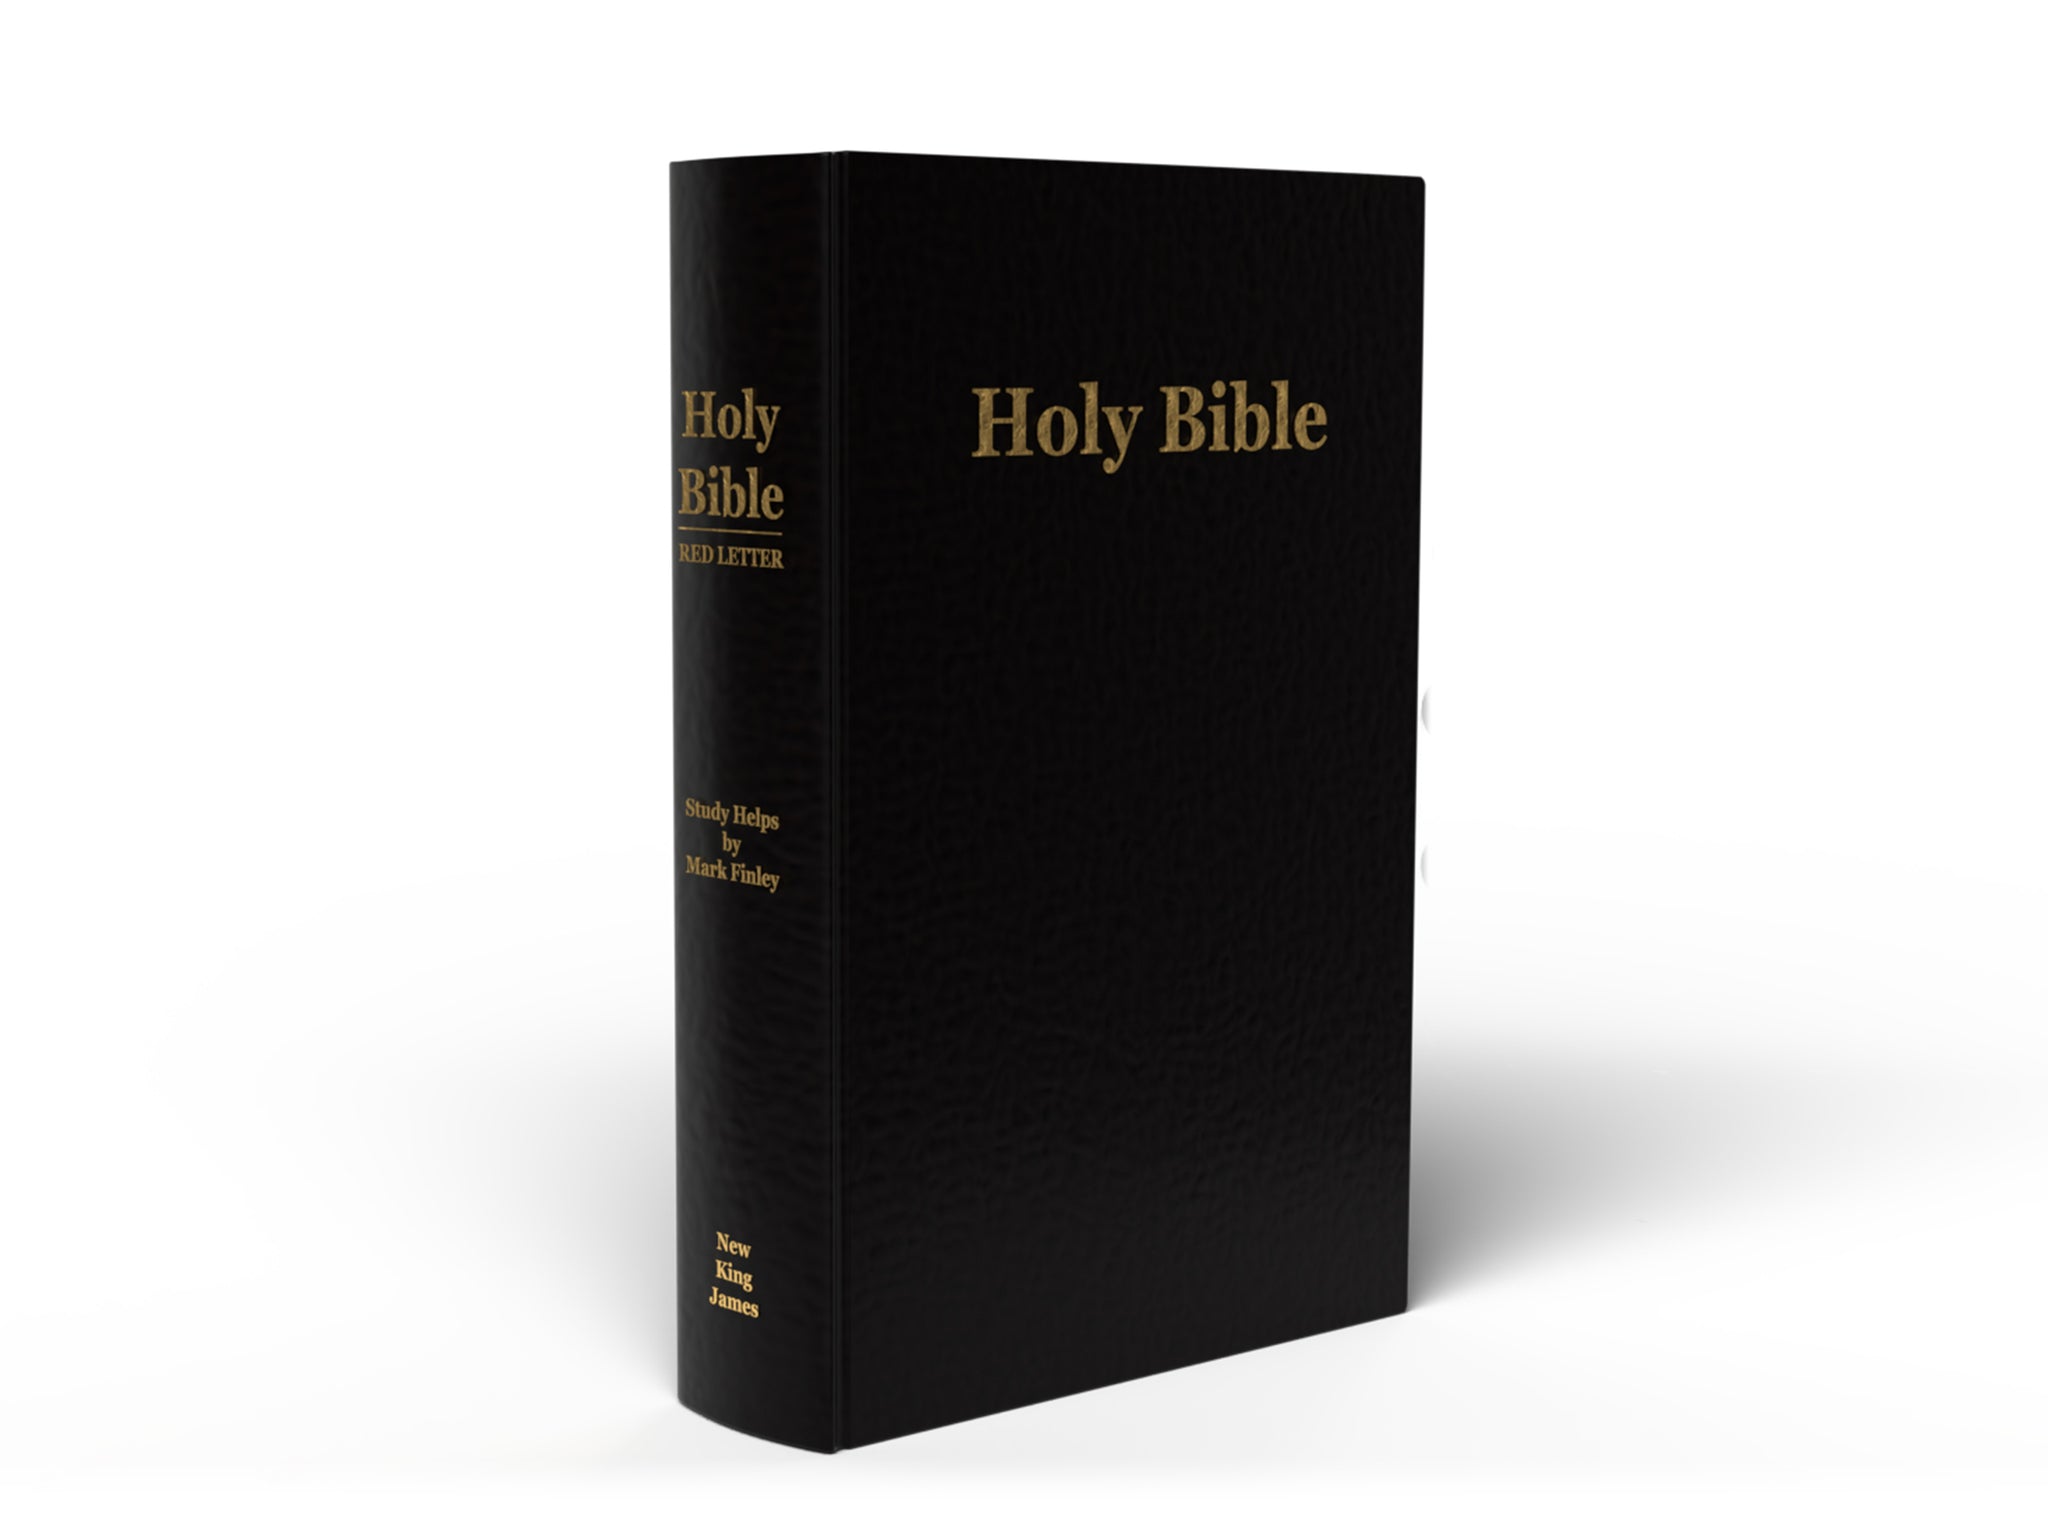 NKJV Bible - With Mark Finley Bible Study Helps (Black Hardcover)